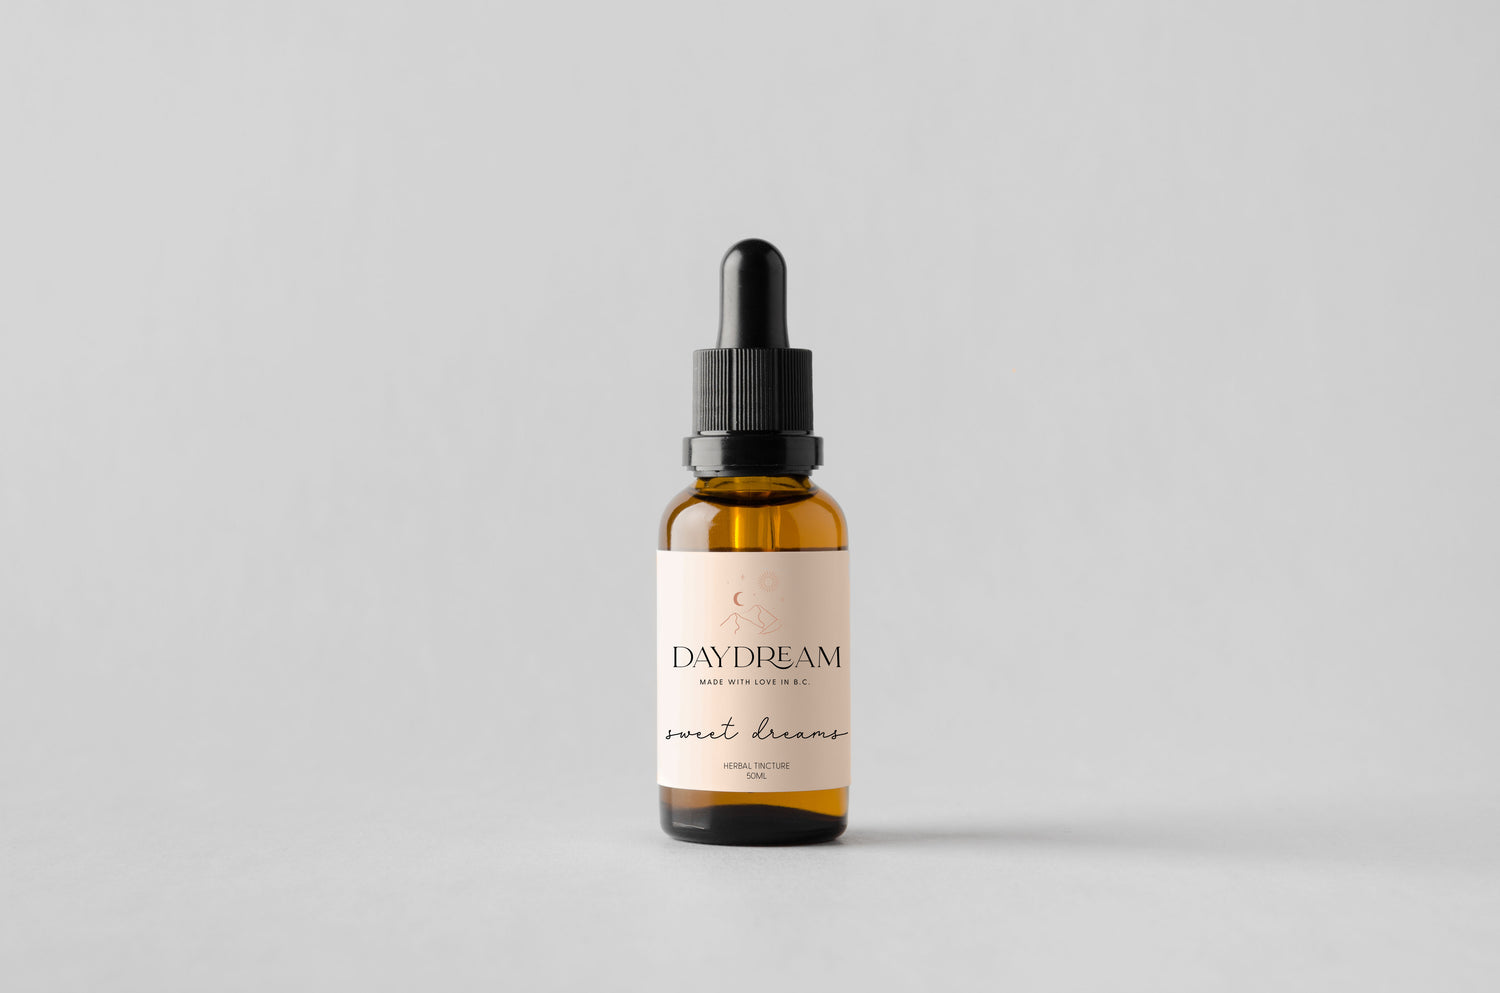 Our Sweet Dreams herbal tincture is blend of Valerian, Lemon Balm and Hops and has been formulated to help you drift off to sleep with ease by relieving difficulty falling asleep, nervous tension and feelings of restlessness. 